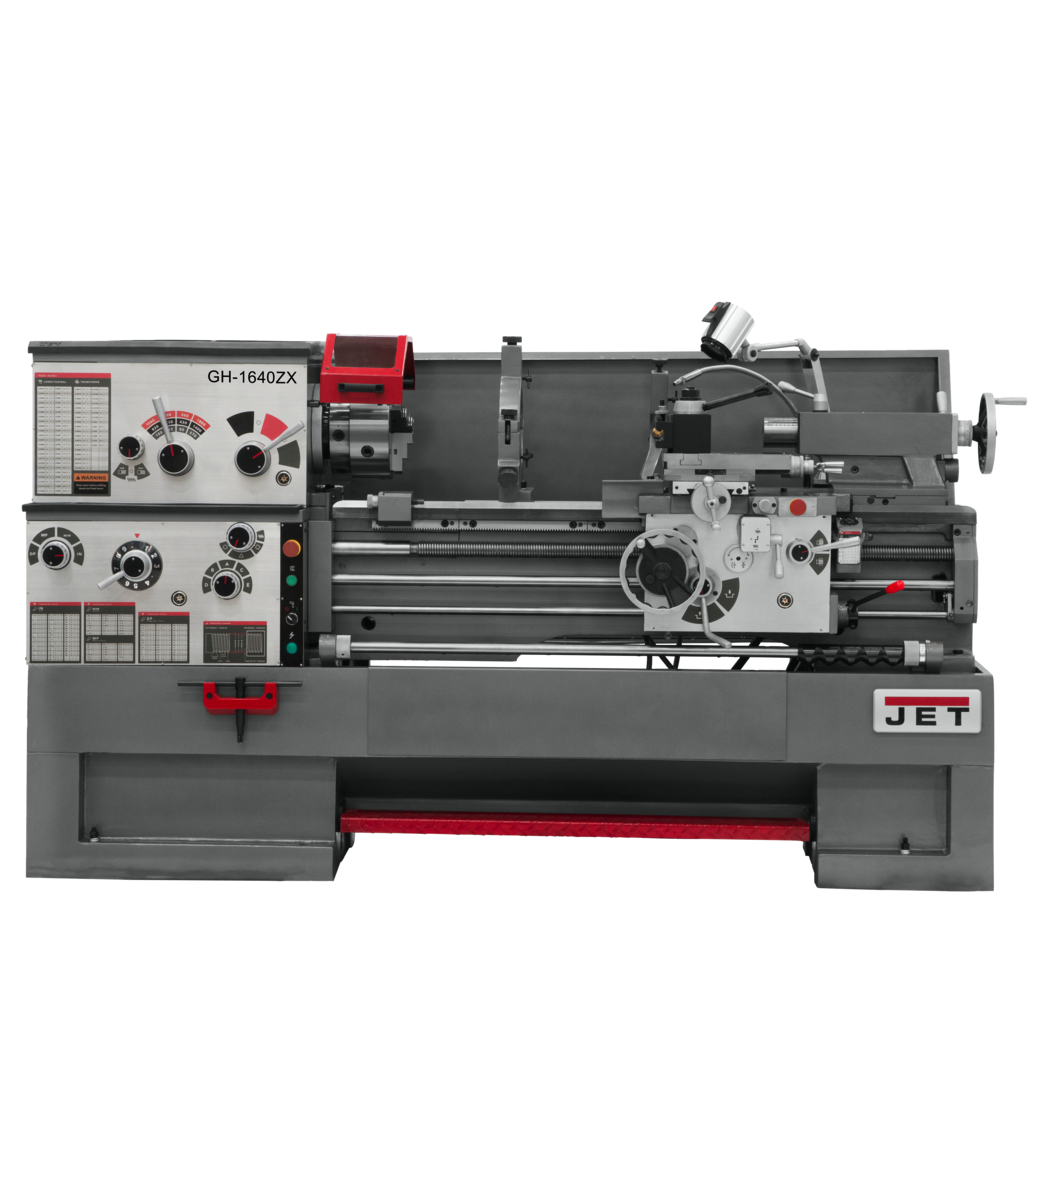 321930, GH-1640ZX, GH-1640ZX, 16" Swing 40" Centers, D1-8 Camlock Spindle, 7-1/2HP, 3Ph, 230/460V, Jet, Metalworking, Turning, Lathes